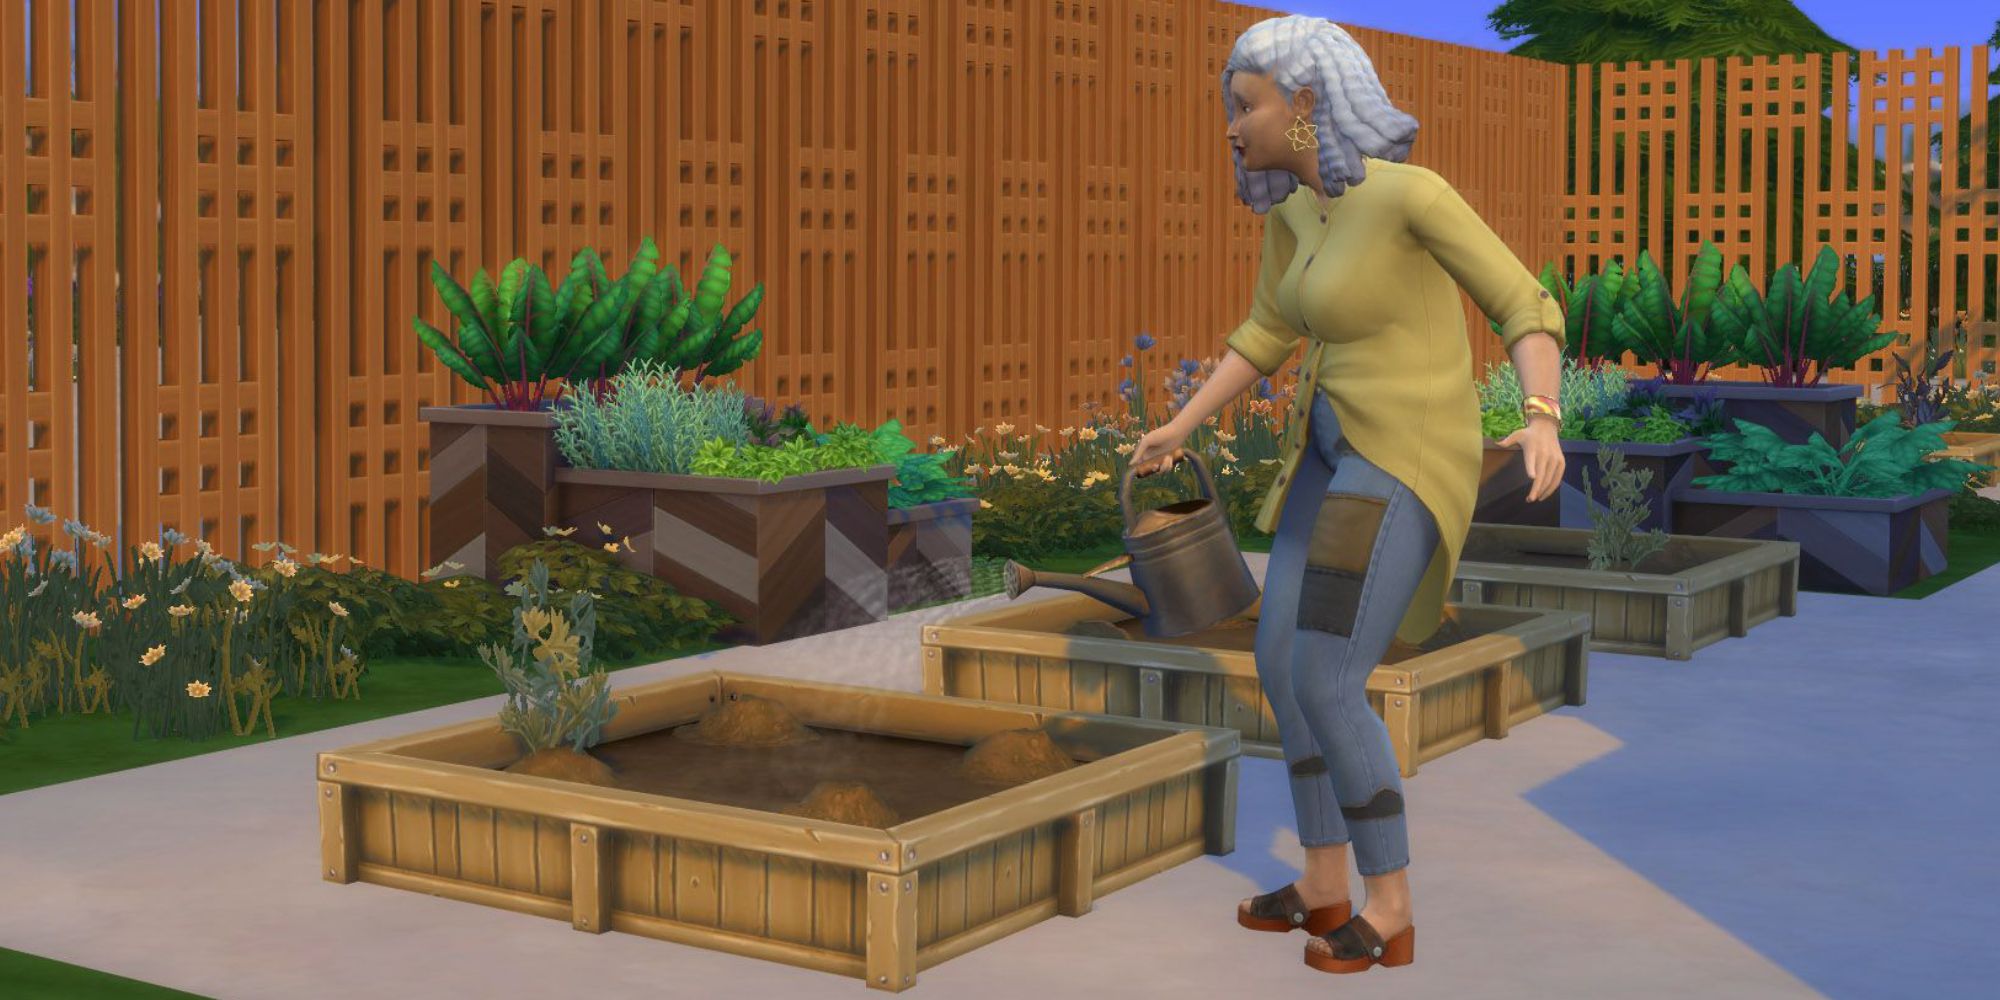 The Sims 4 Blossom Gardening in the eco lifestyle community garden